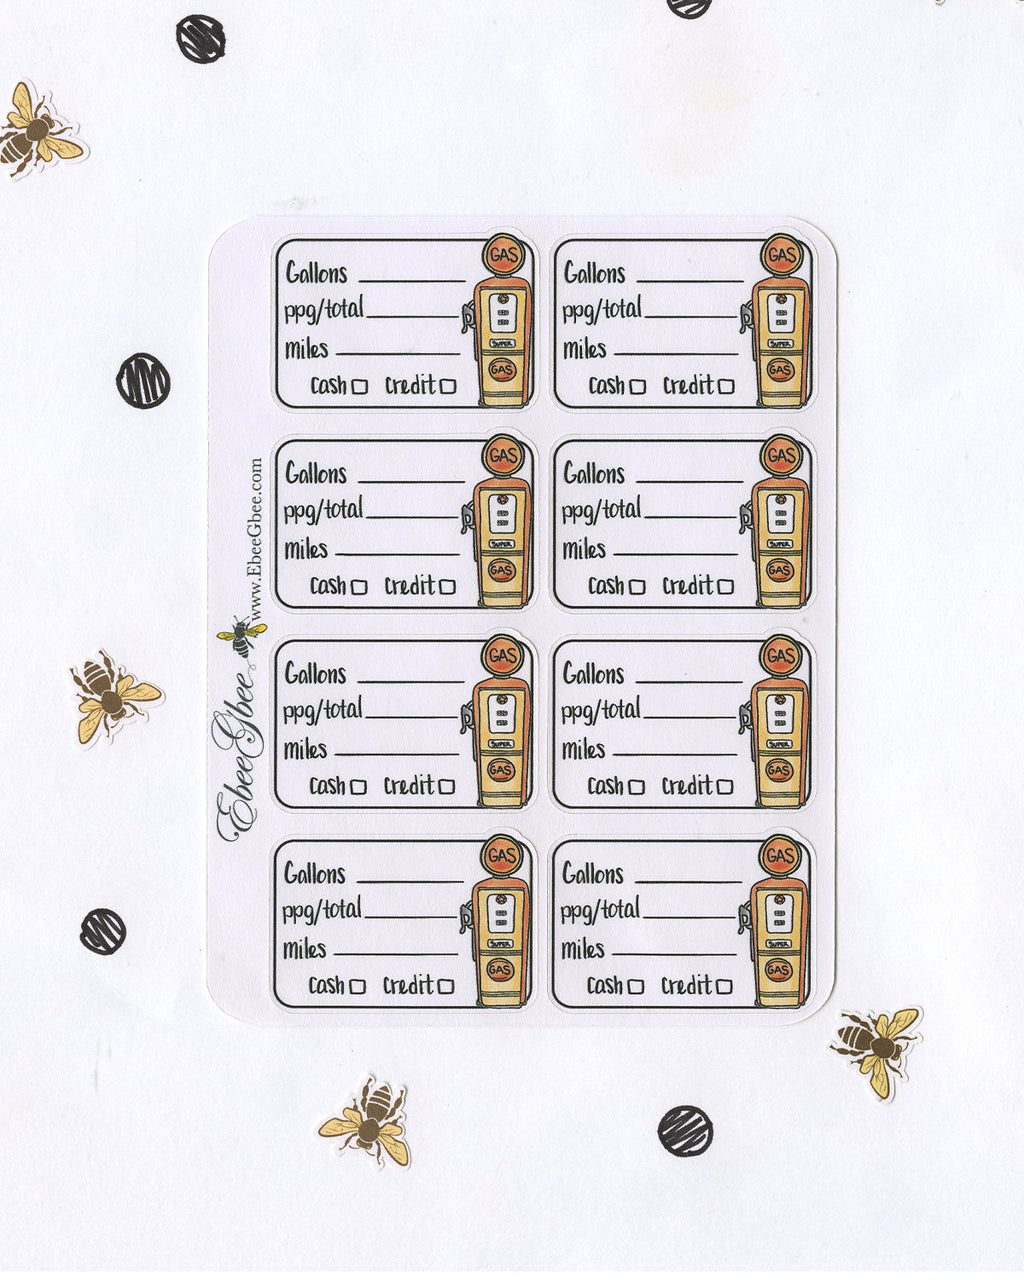 FUEL LOG Planner Stickers | Hand Drawn BuJo Style